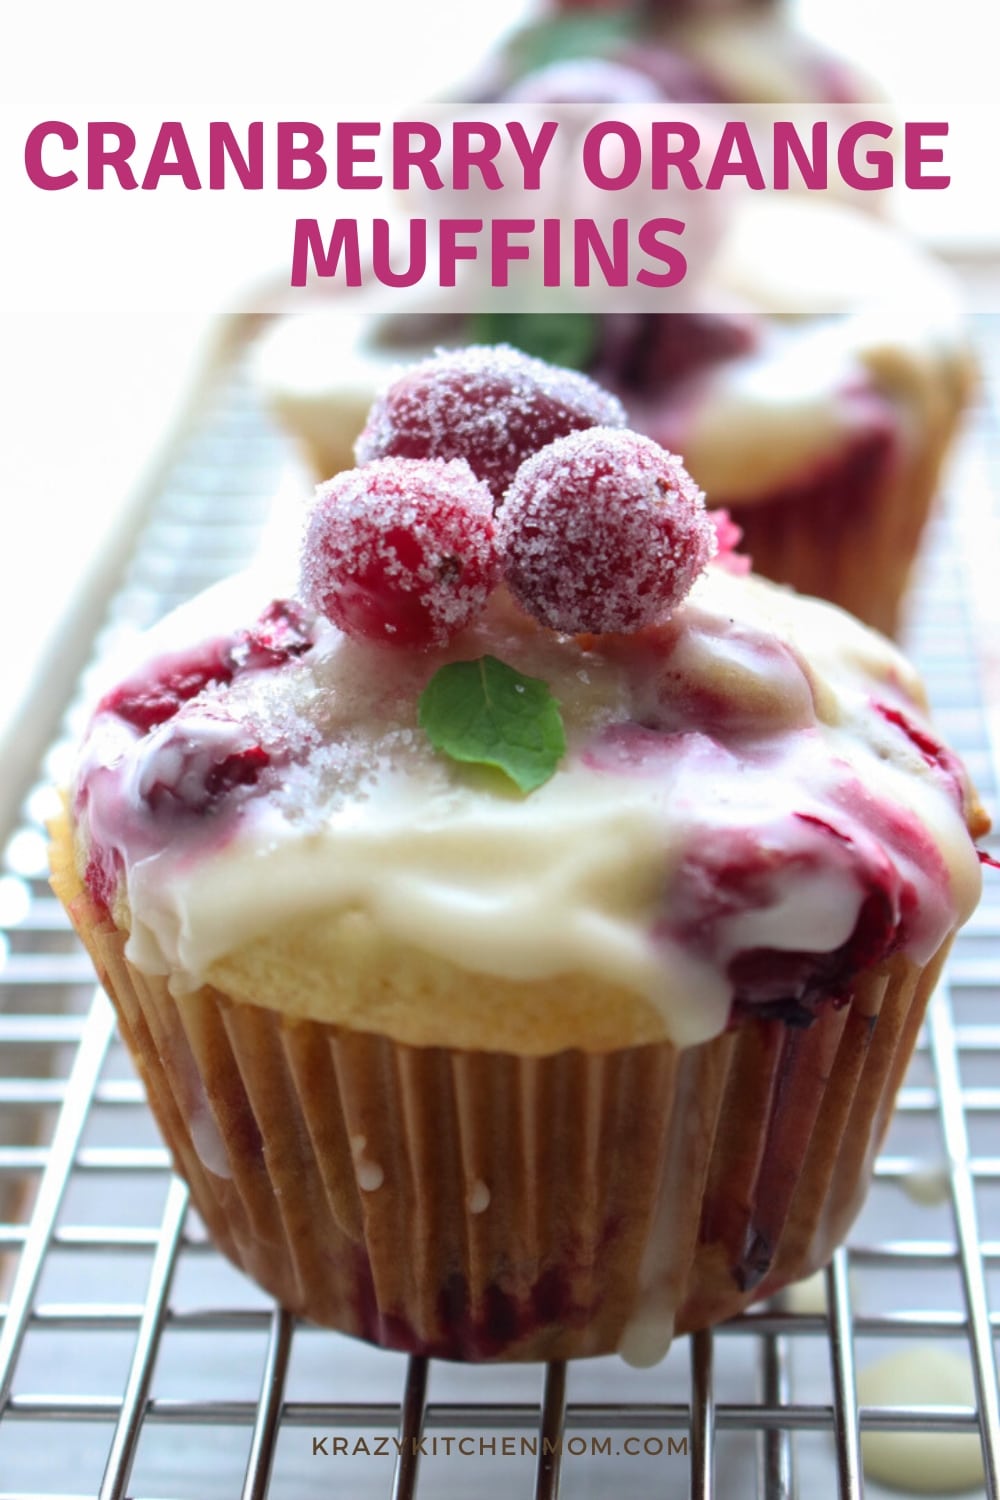 Treat yourself and your family to a delicious morning breakfast with these Cranberry Orange Muffins with a sweet Orange Glaze. via @krazykitchenmom